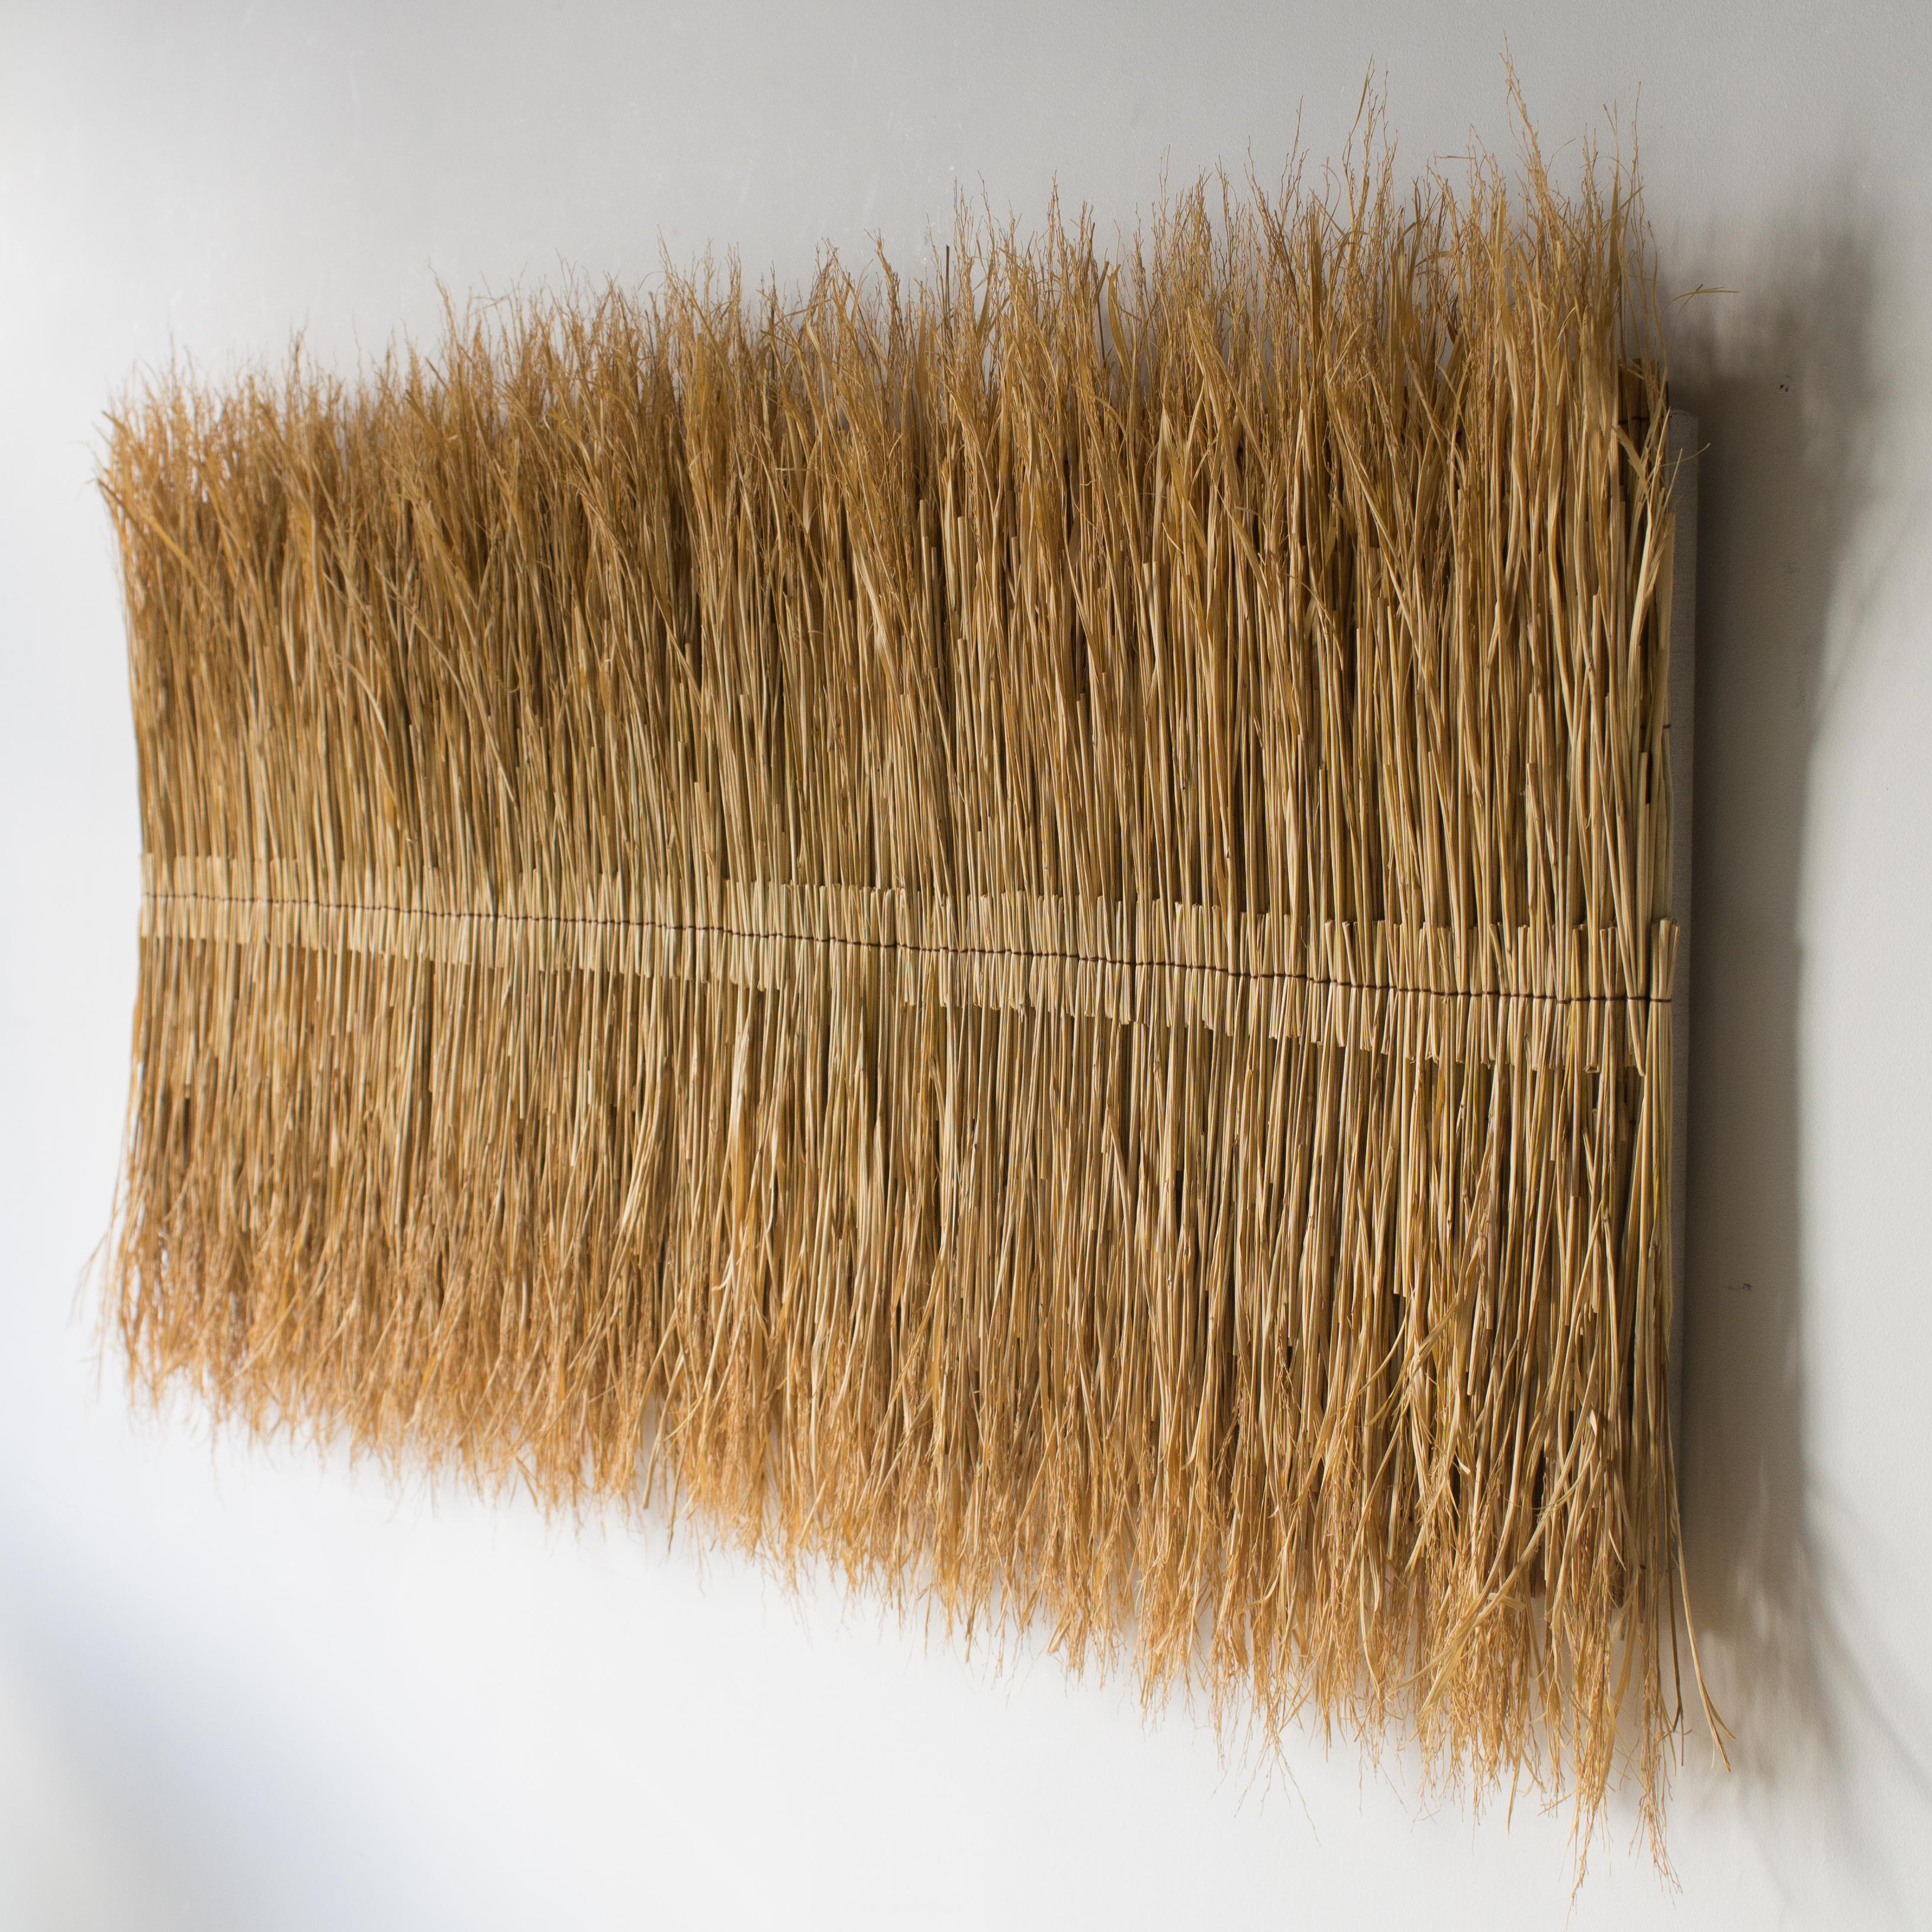 Hand-sewed rice straw art by Arko.
Title: A head-sea over the night sky (Small model)
This work has the feelings of contemporary, tribal art, contemporary craft art, created with the respect for wild nature.
Arko is a finalist of the Loewe Craft